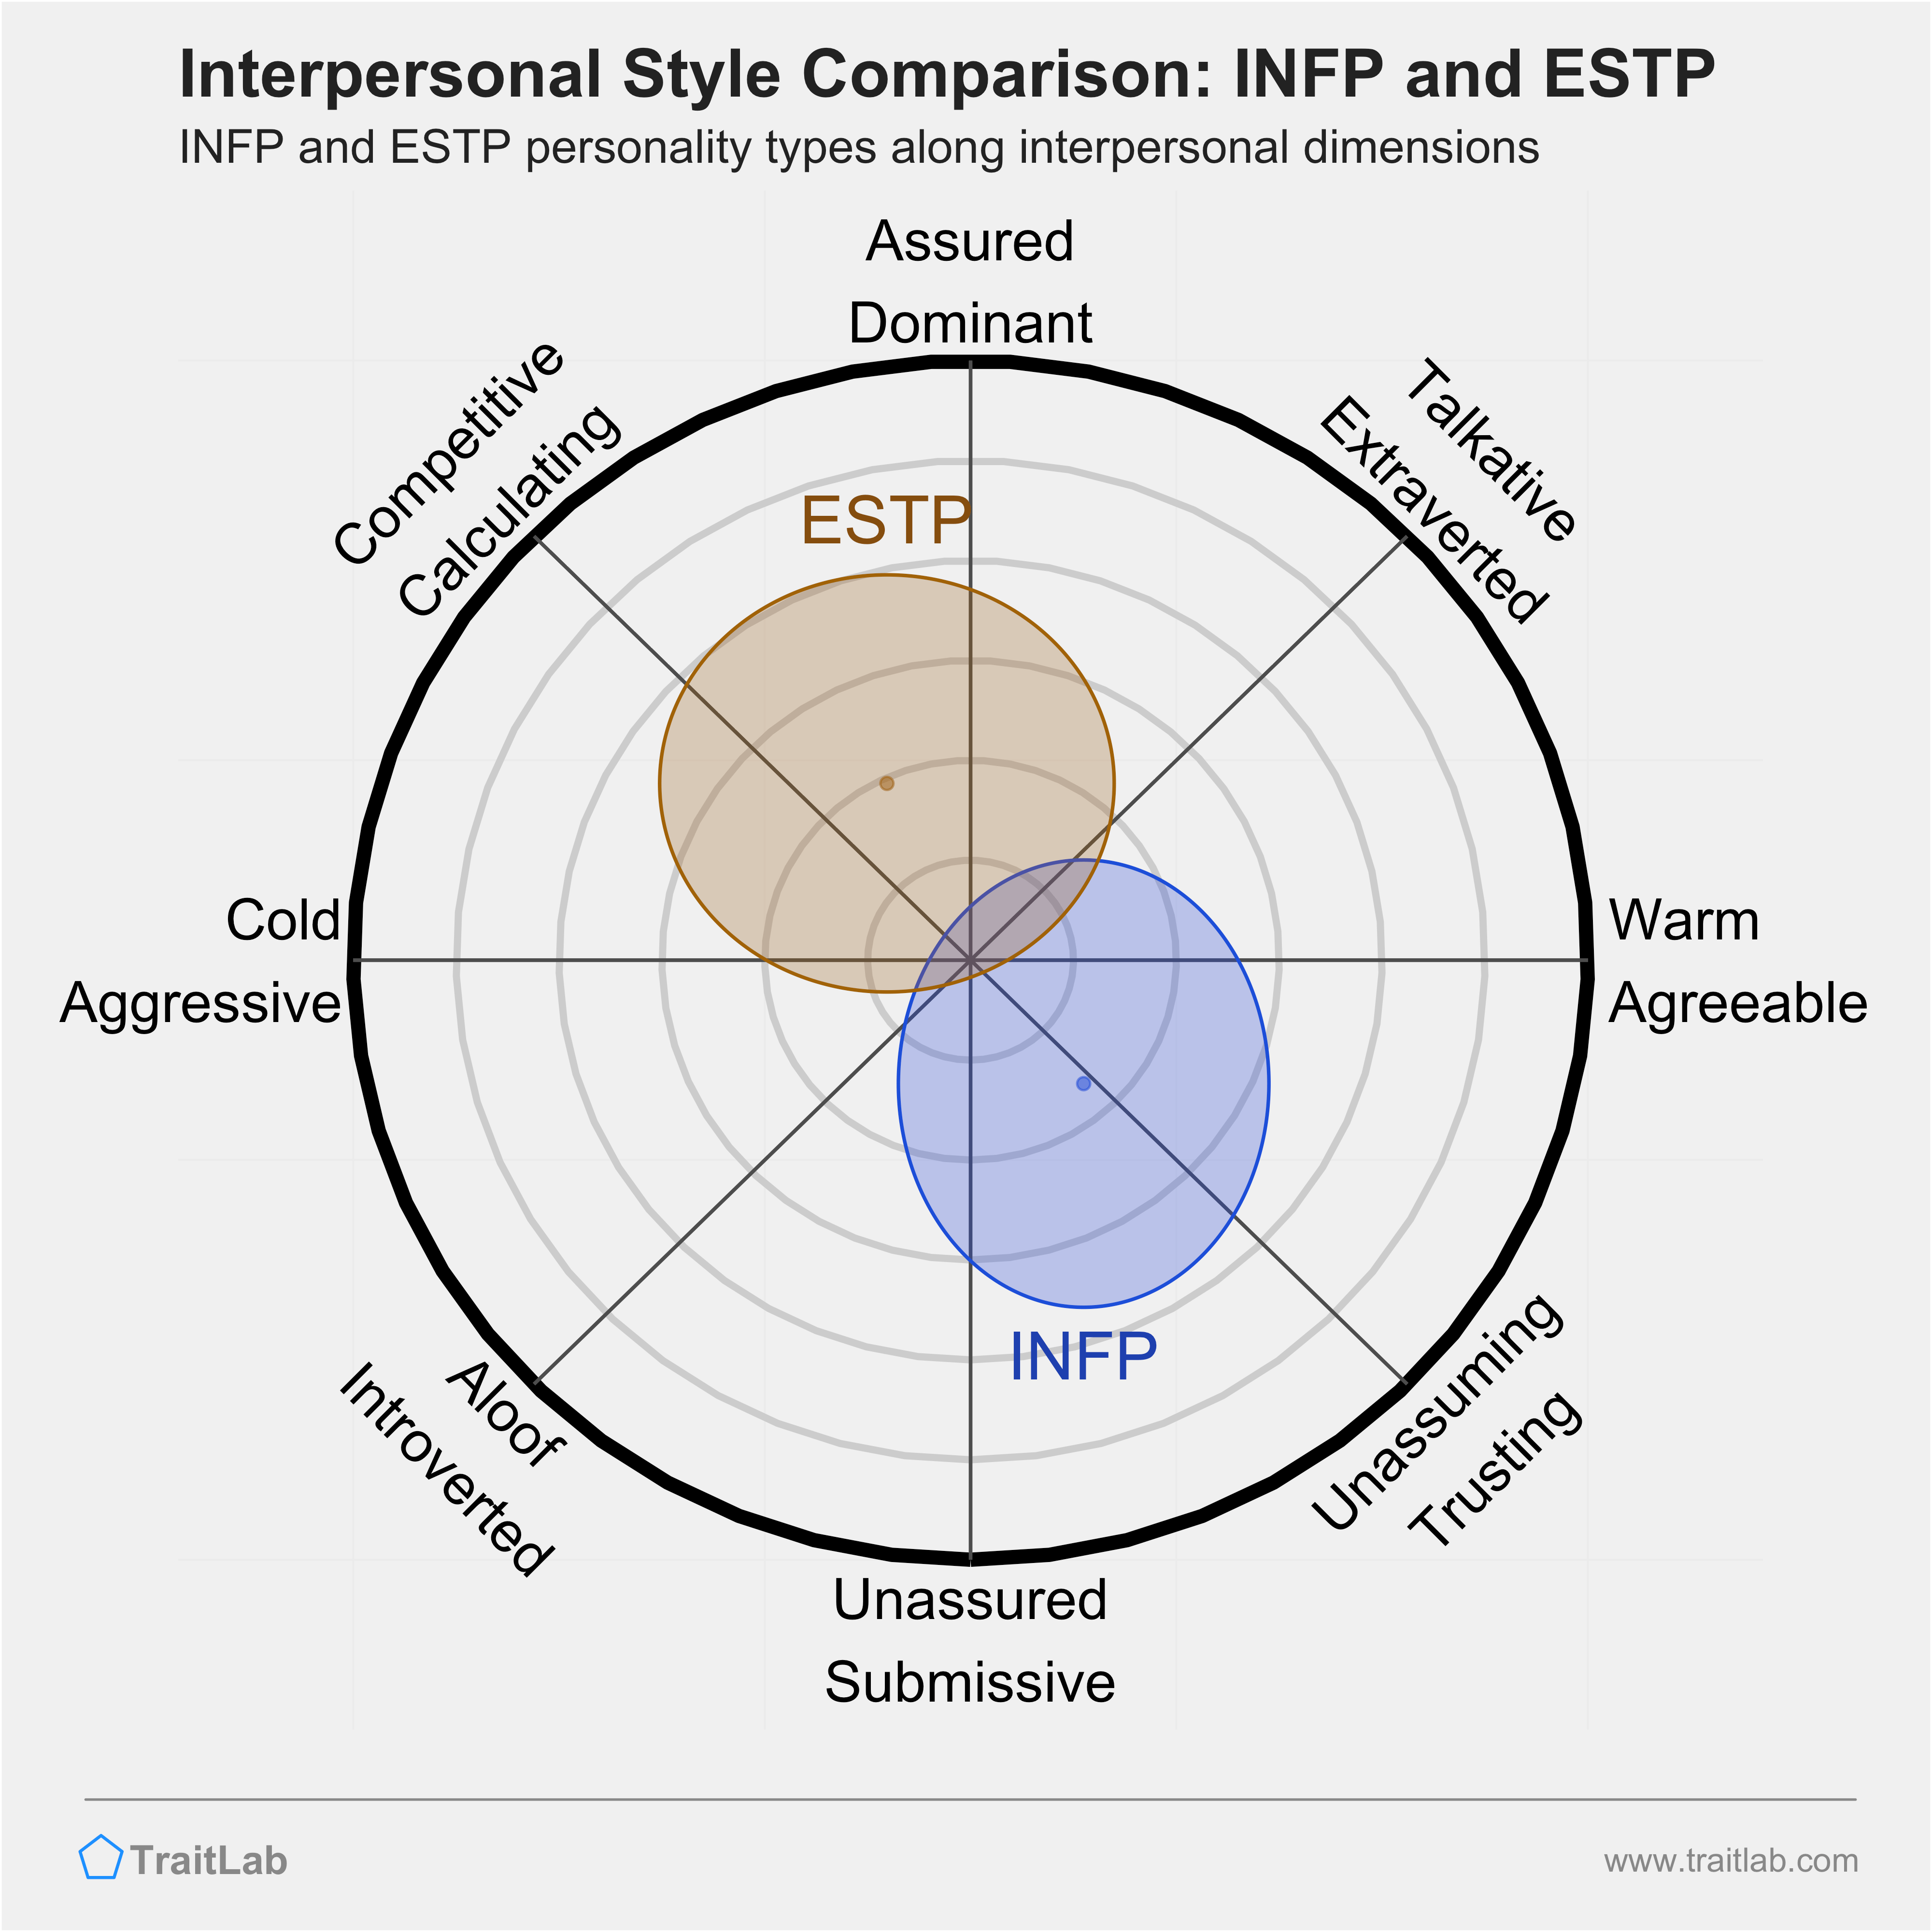 INFP and ESTP comparison across interpersonal dimensions